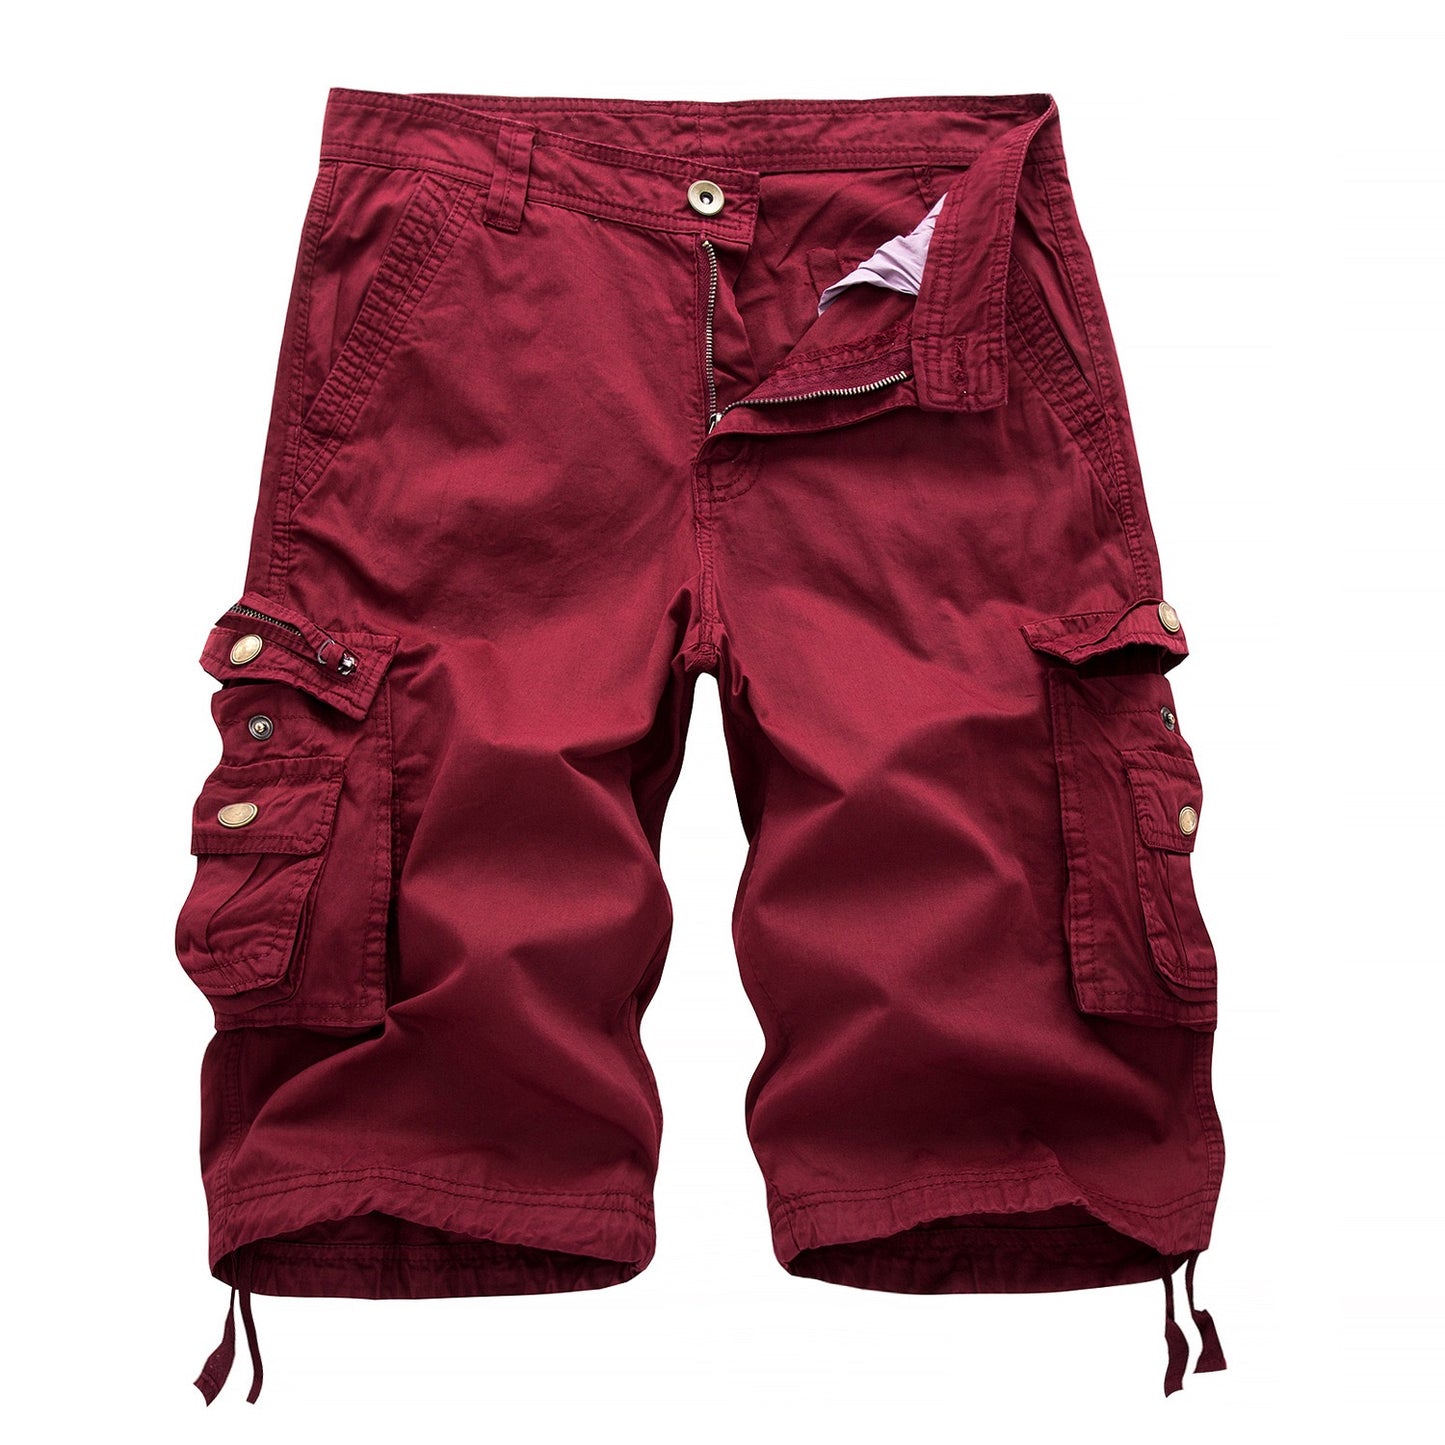 Men's Cargo Shorts Shorts Work Shorts Multi Pocket Solid Color Knee Length Going out Cotton Streetwear